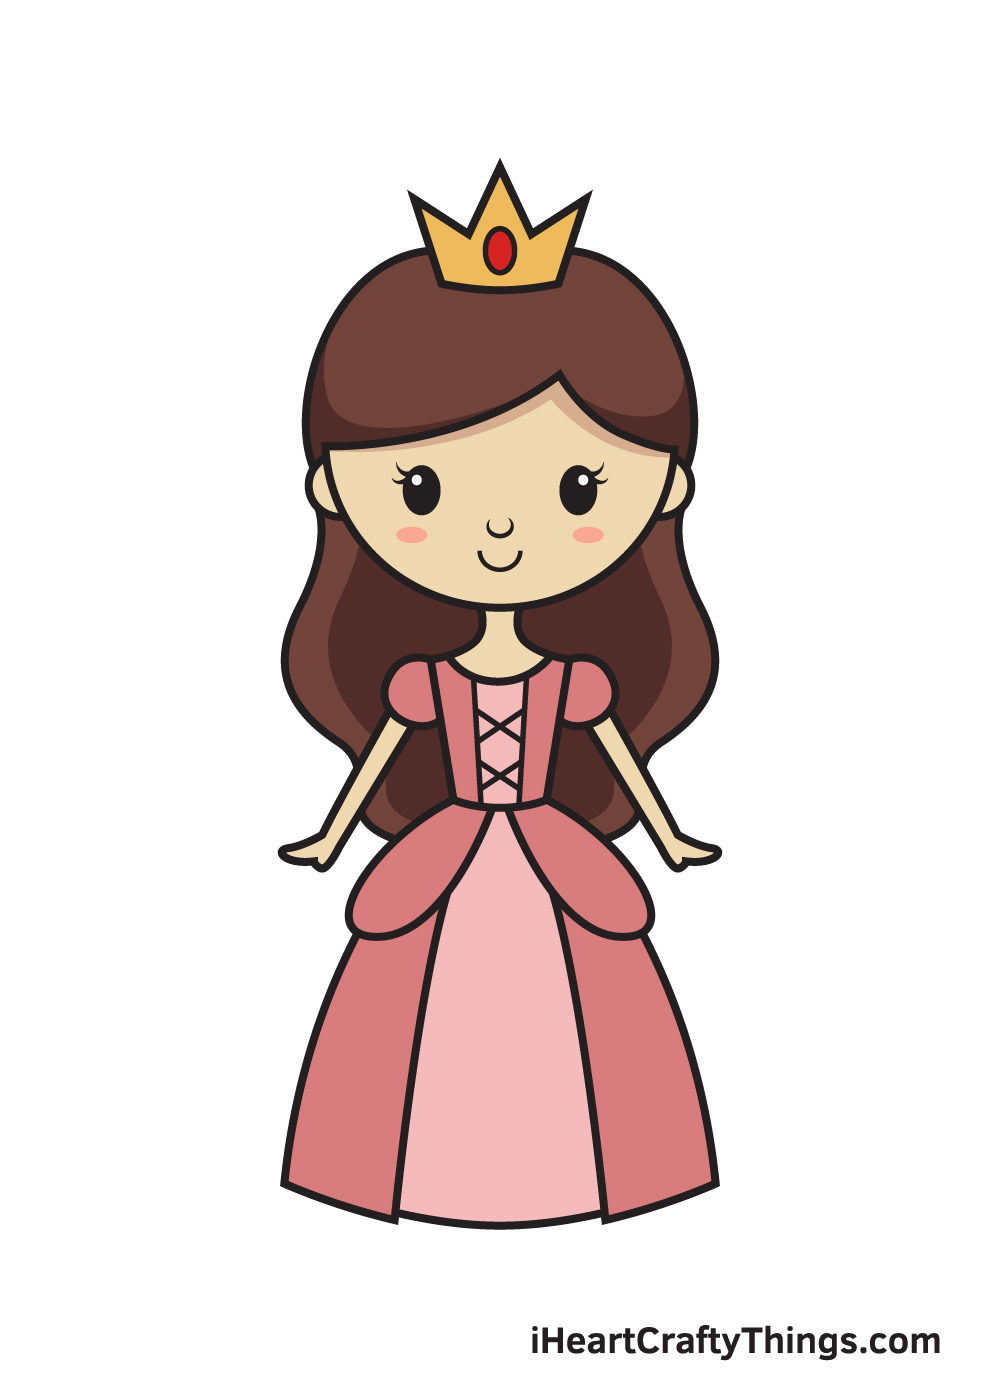 How to Draw a Girl as a Princess